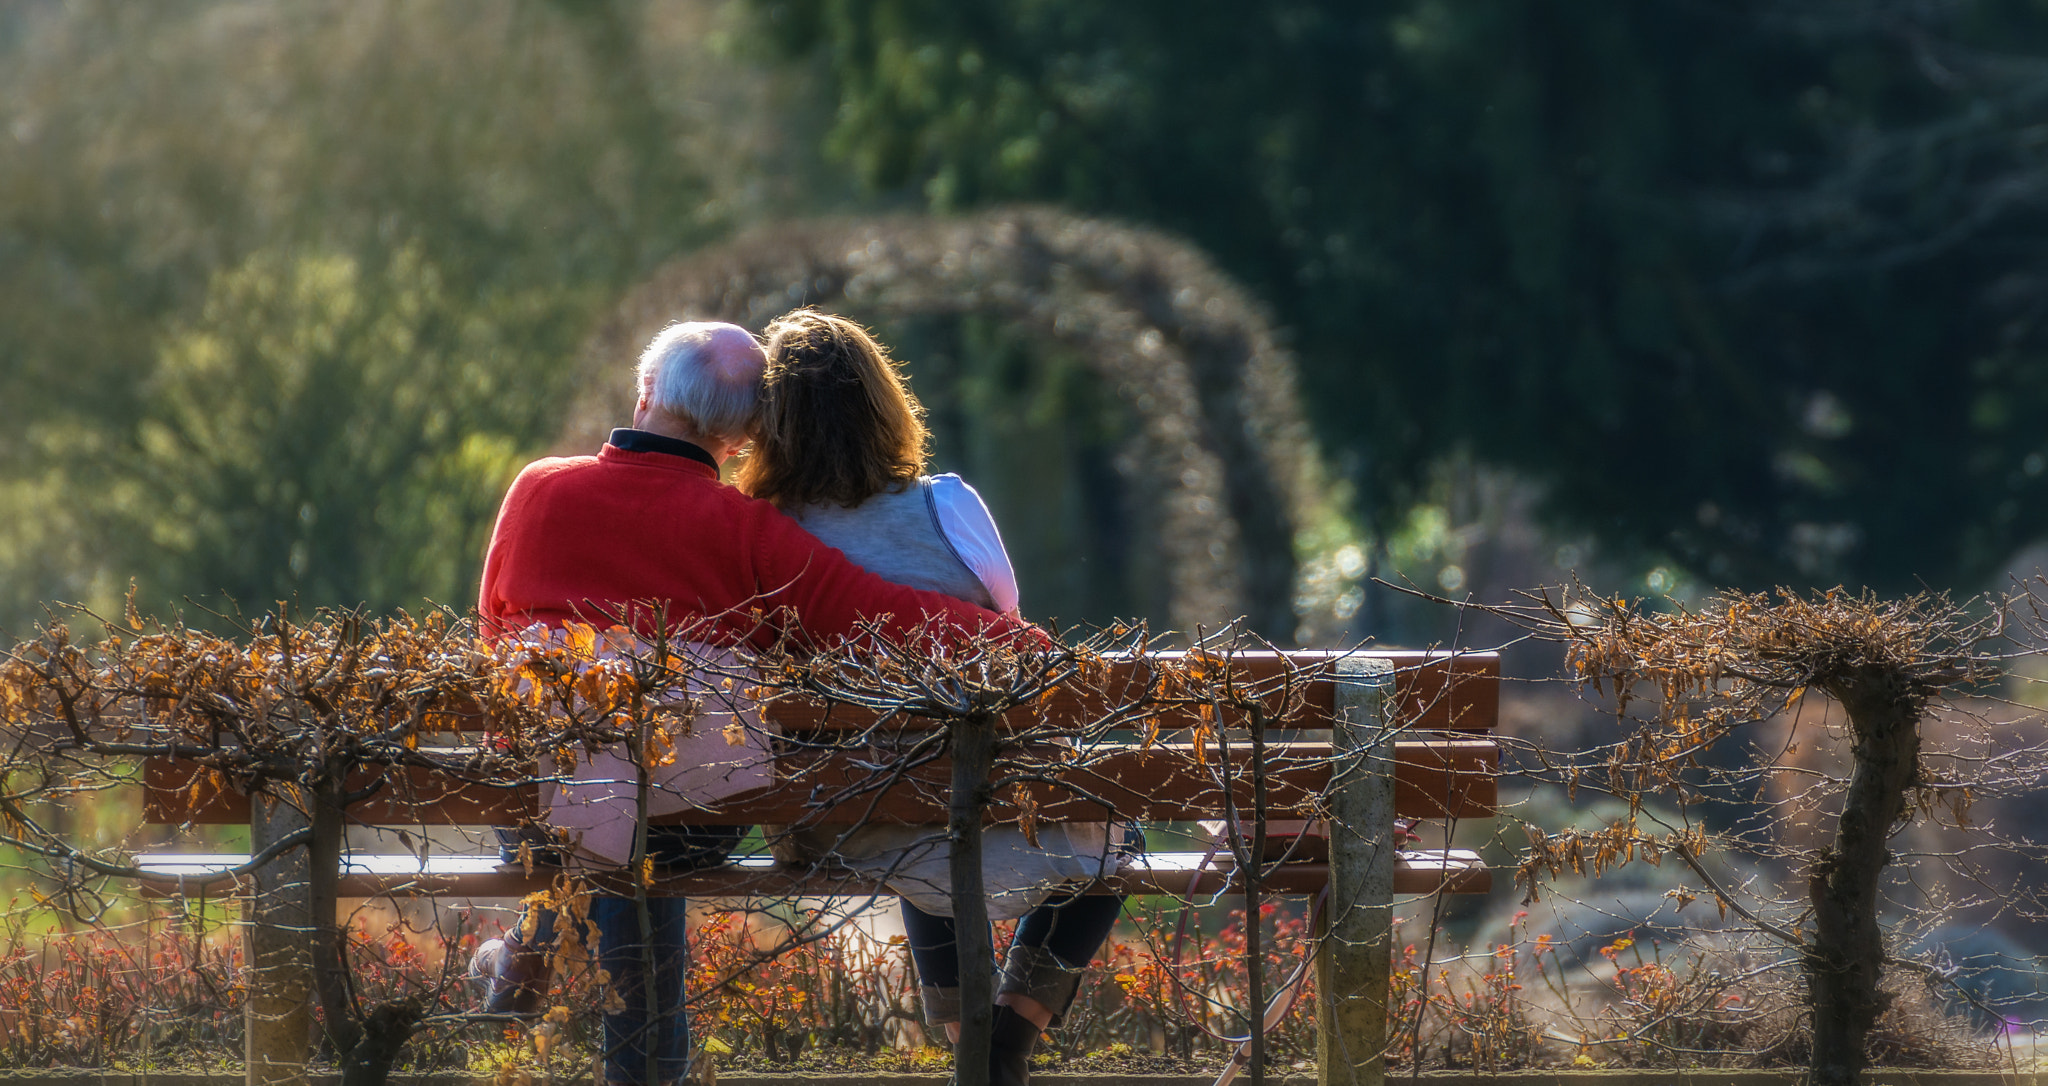 Nikon D7100 sample photo. "lovers in the autumn of life" photography